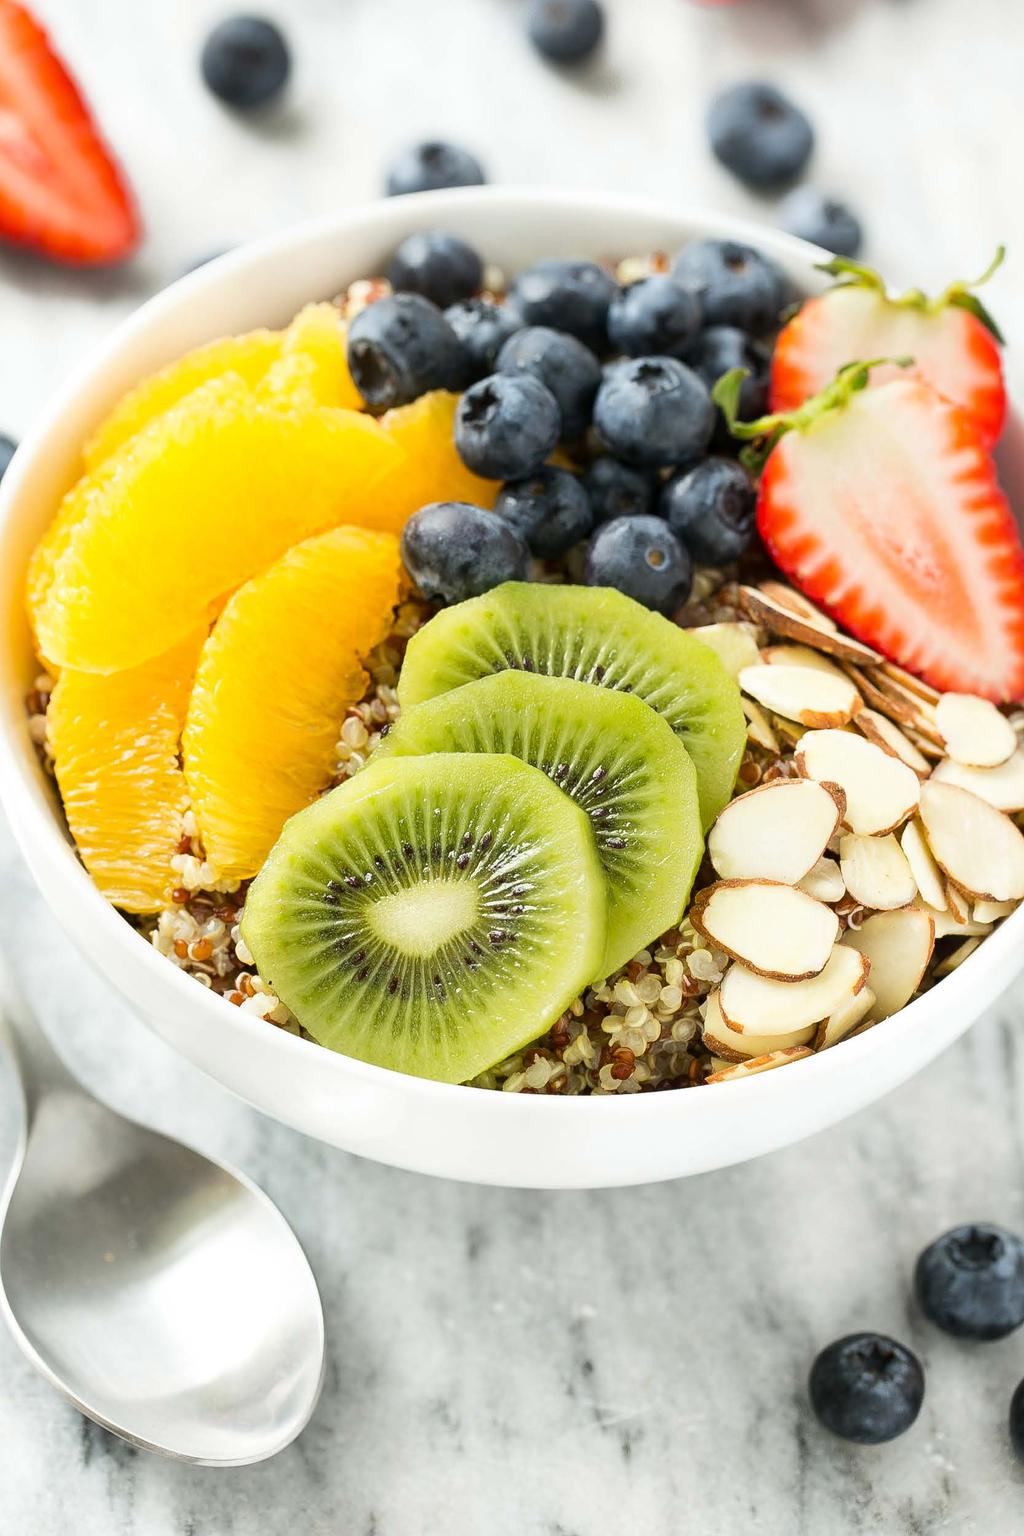 17. Zesty Orange Quinoa Bowl A simple and colorful breakfast bowl packed with fresh fruit and almonds.